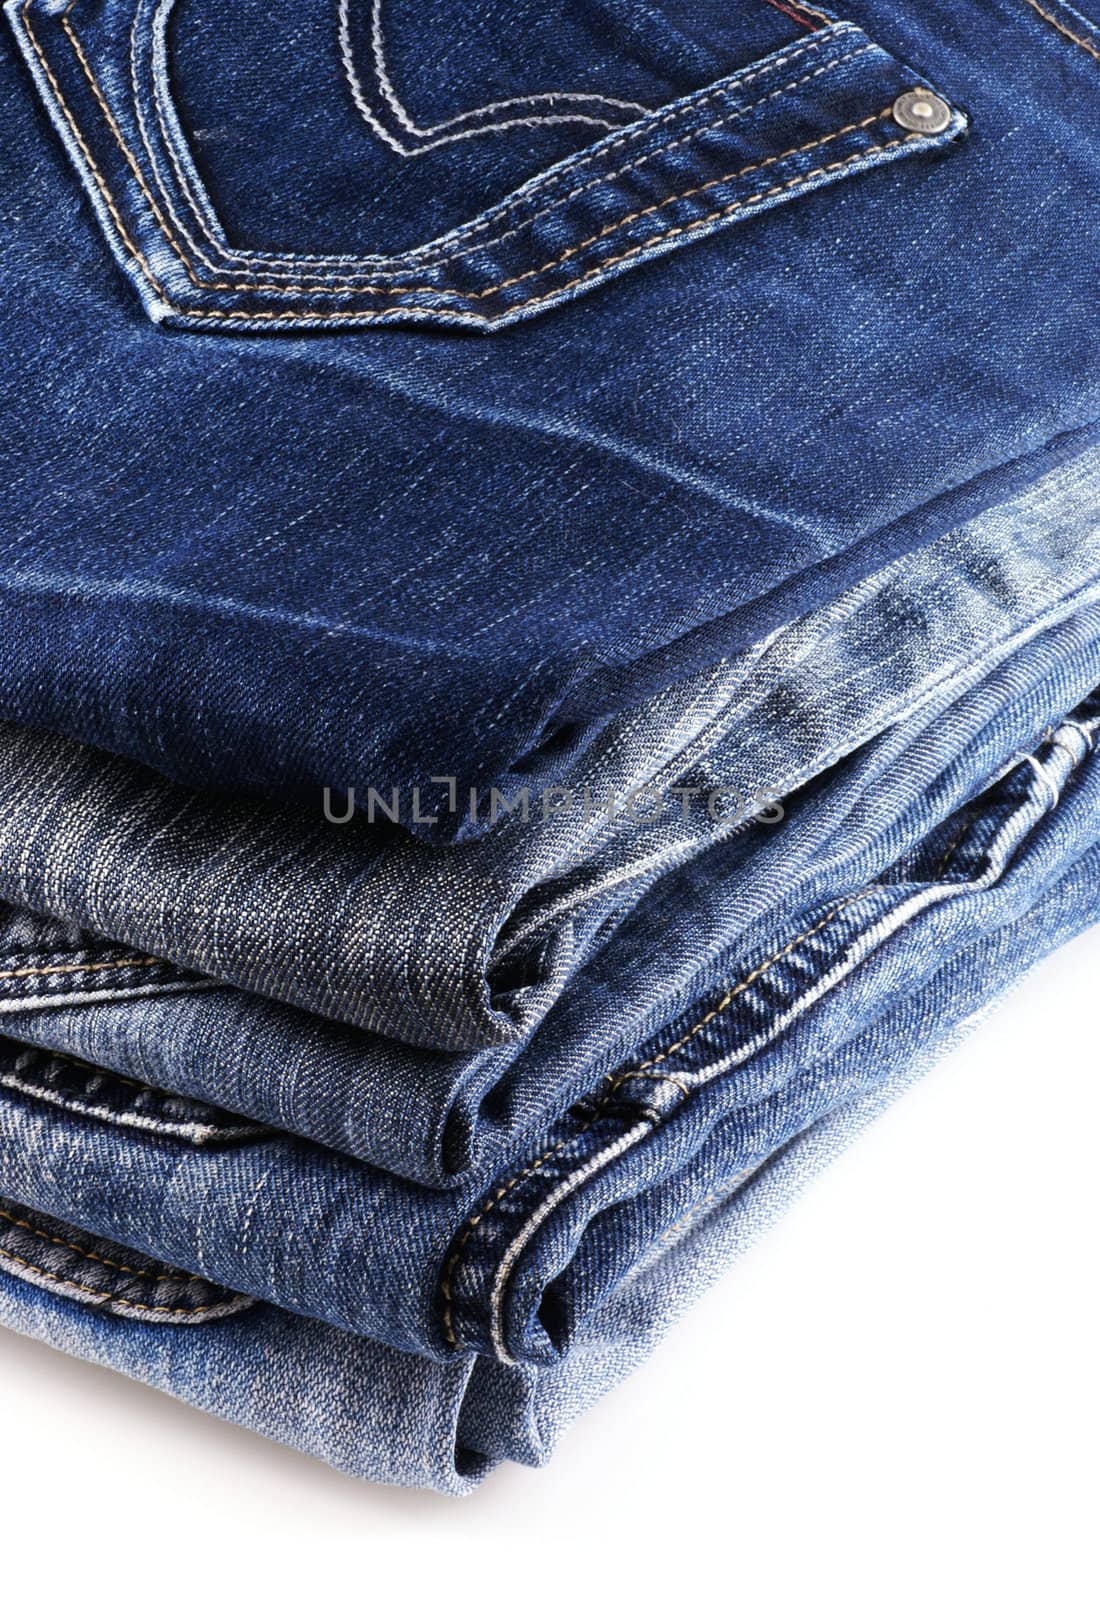 Stack of jeans. by SasPartout